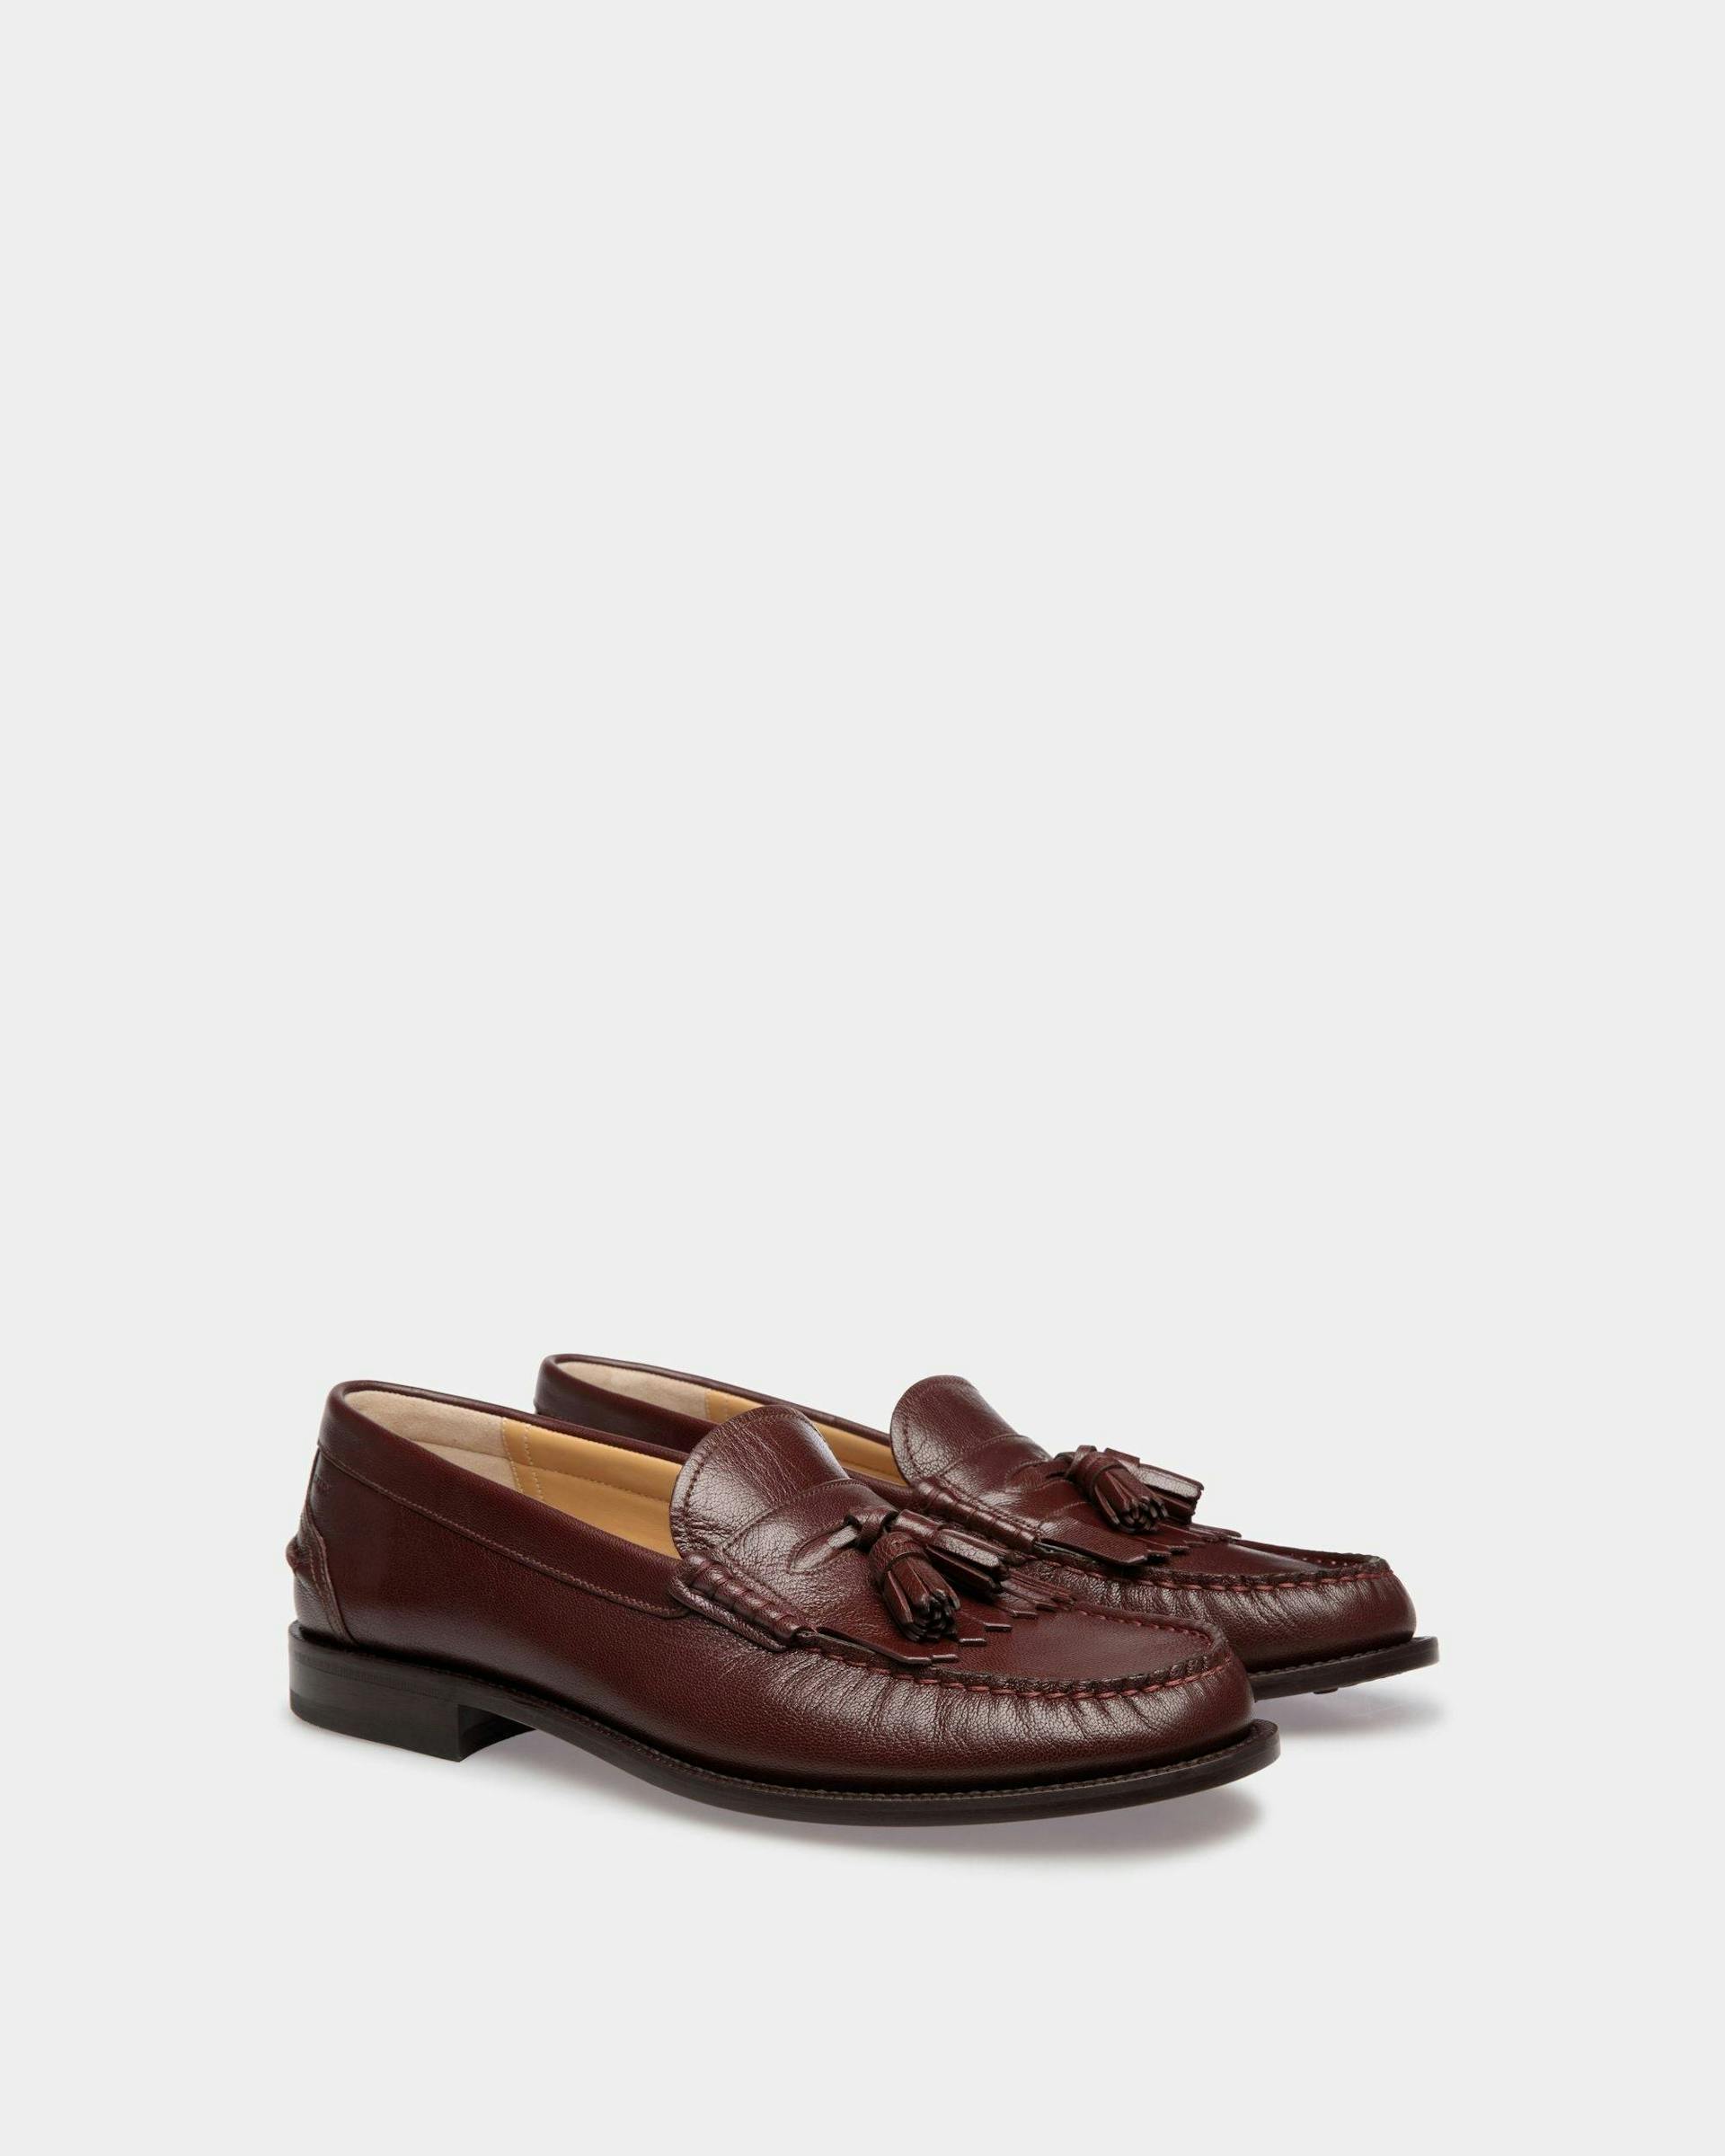 Men's Oregon Loafer in Chestnut Brown Grained Leather | Bally | Still Life 3/4 Front